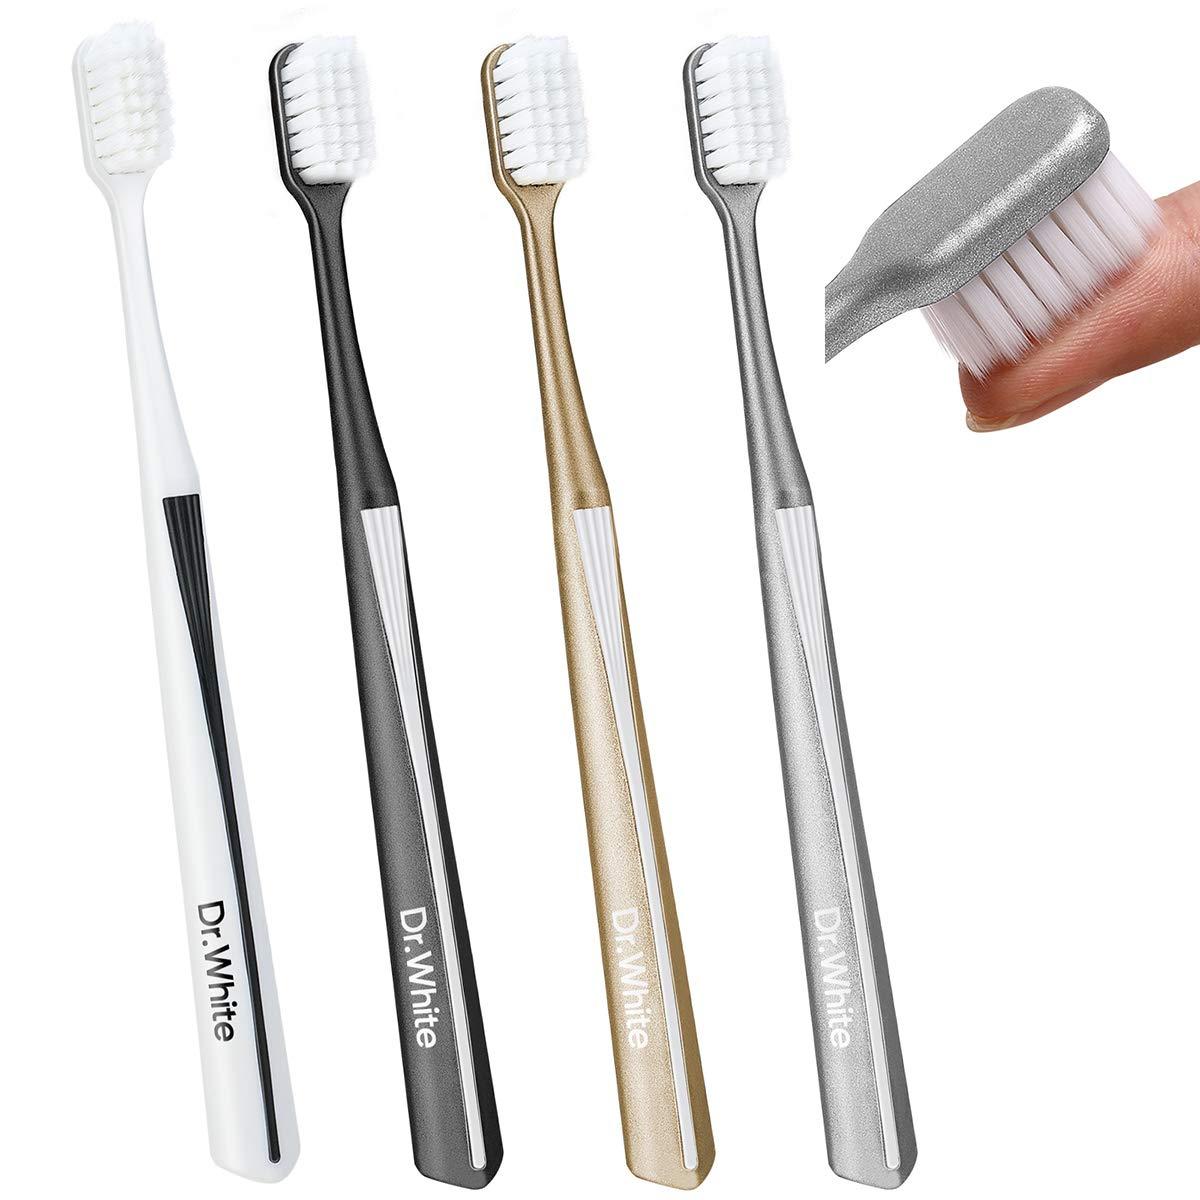 10000 Bristle Micro Nano Toothbrush for Sensitive Teeth and Gums Care ...